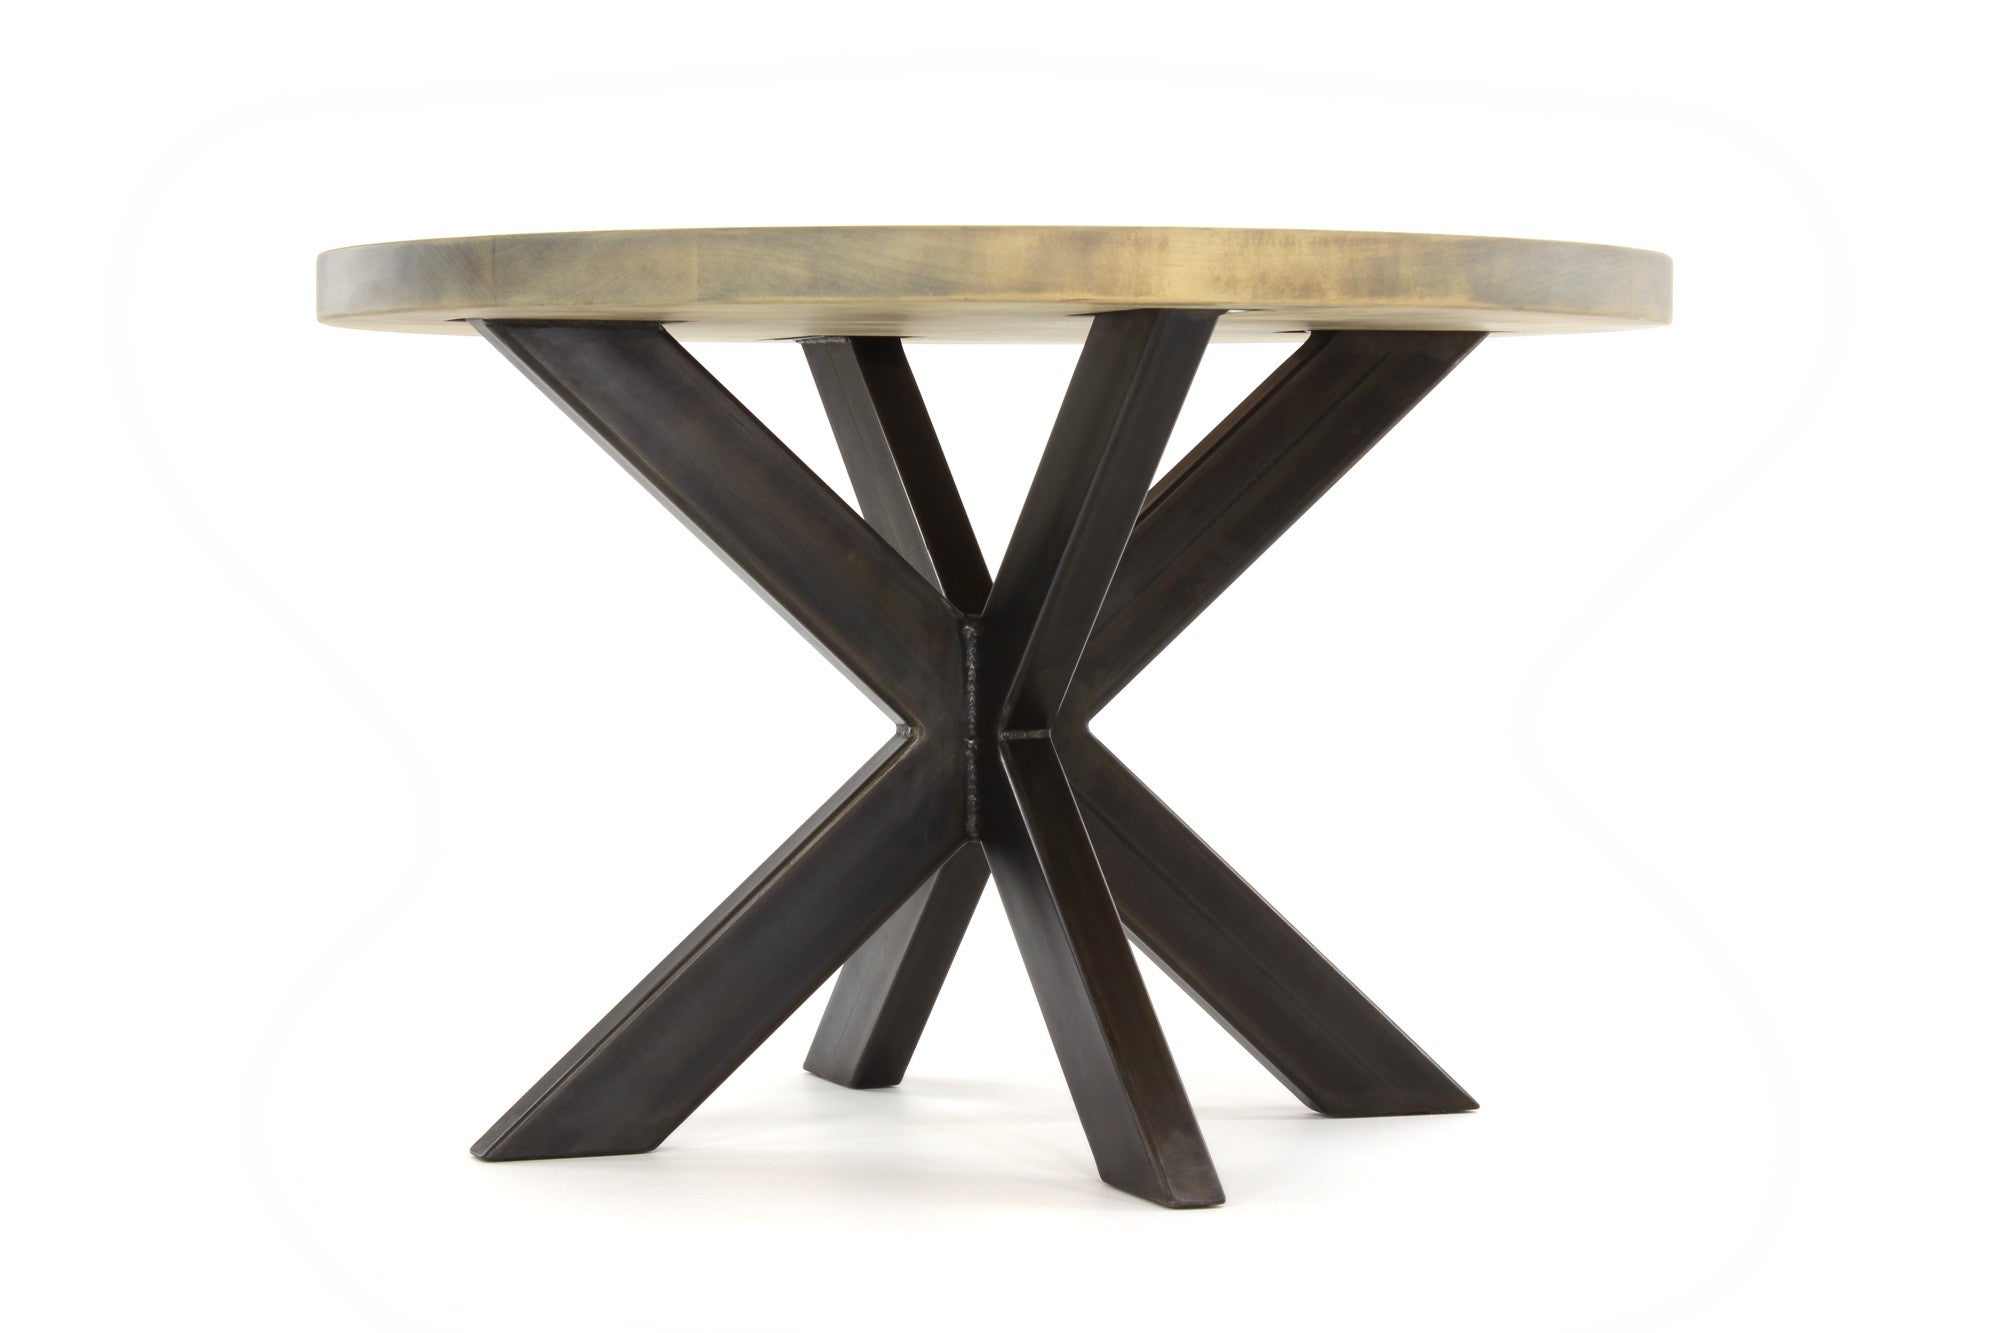 jak dining table | worn maple wood finish with waxed steel